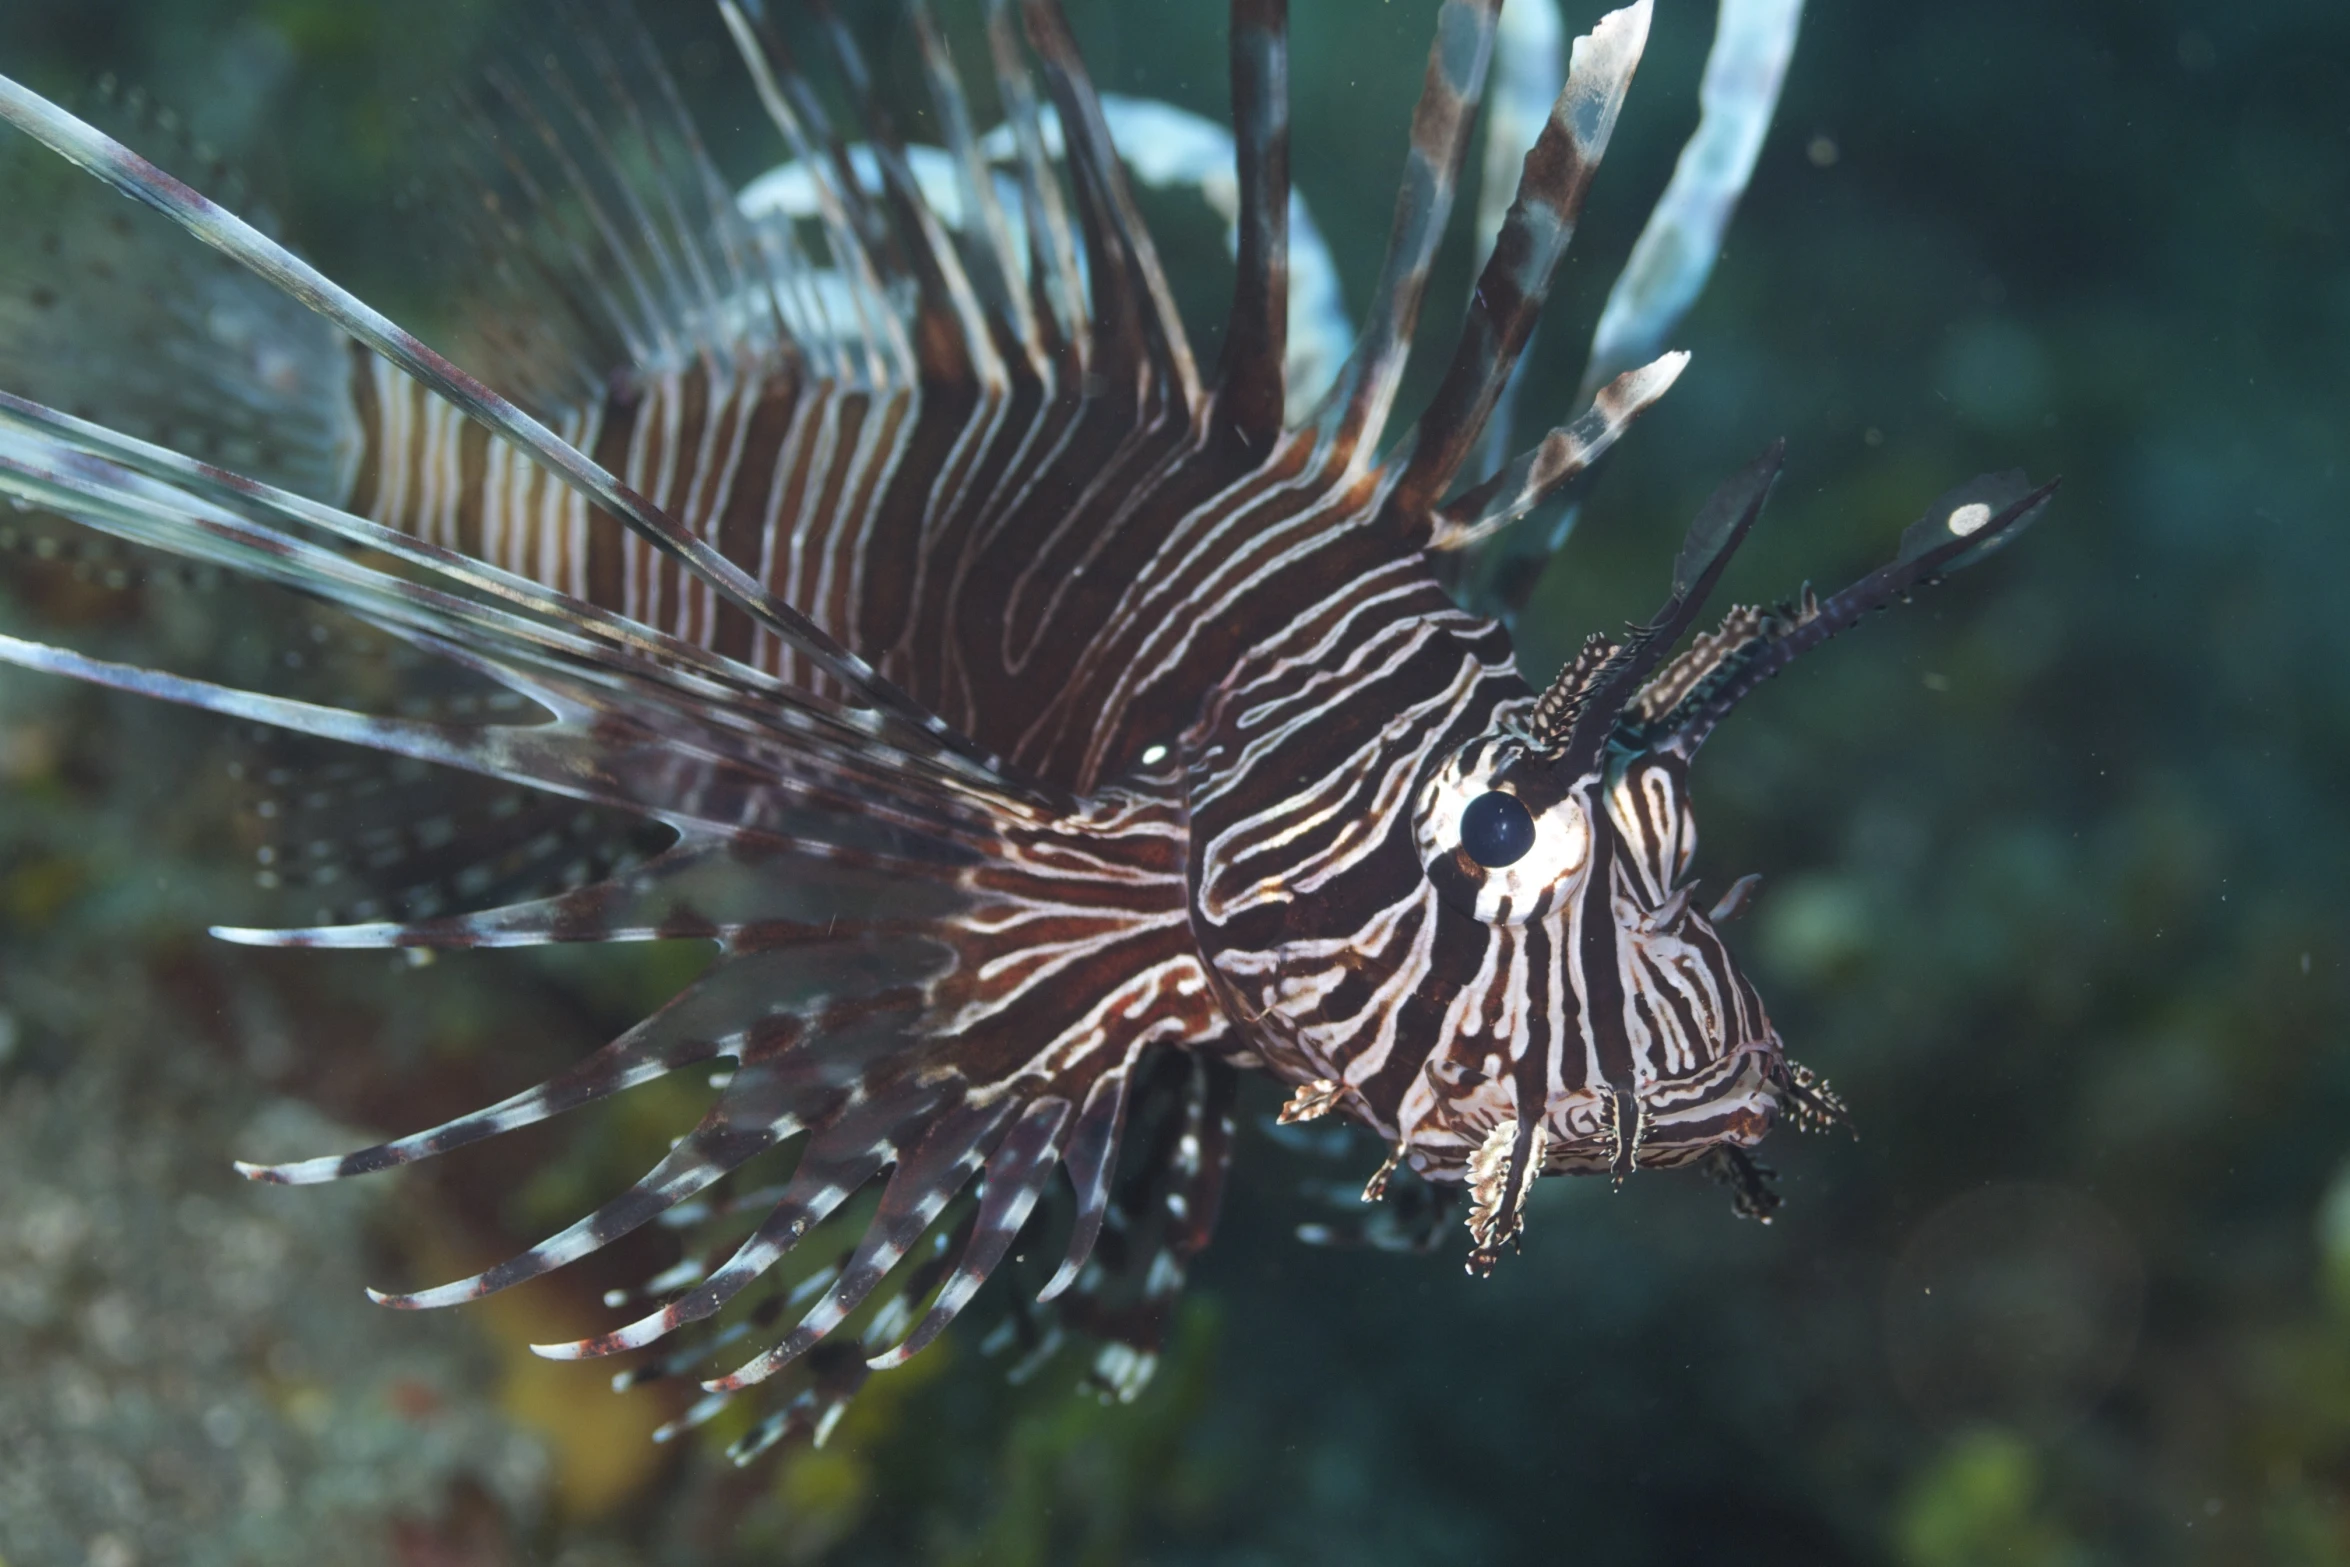 a lion fish is shown in this image